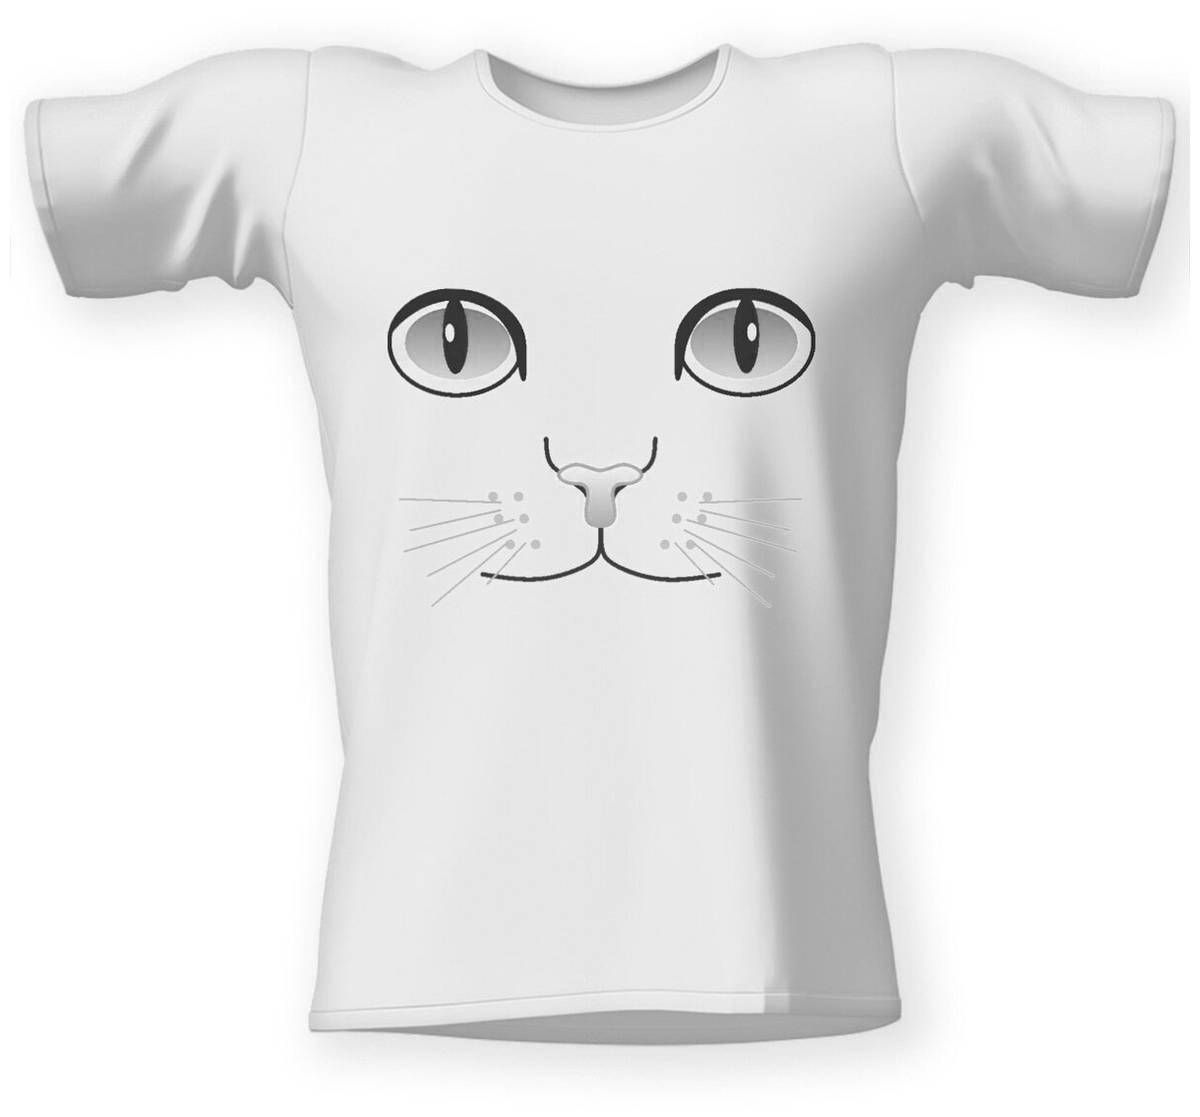 Coloring t-shirt with a playful kitten